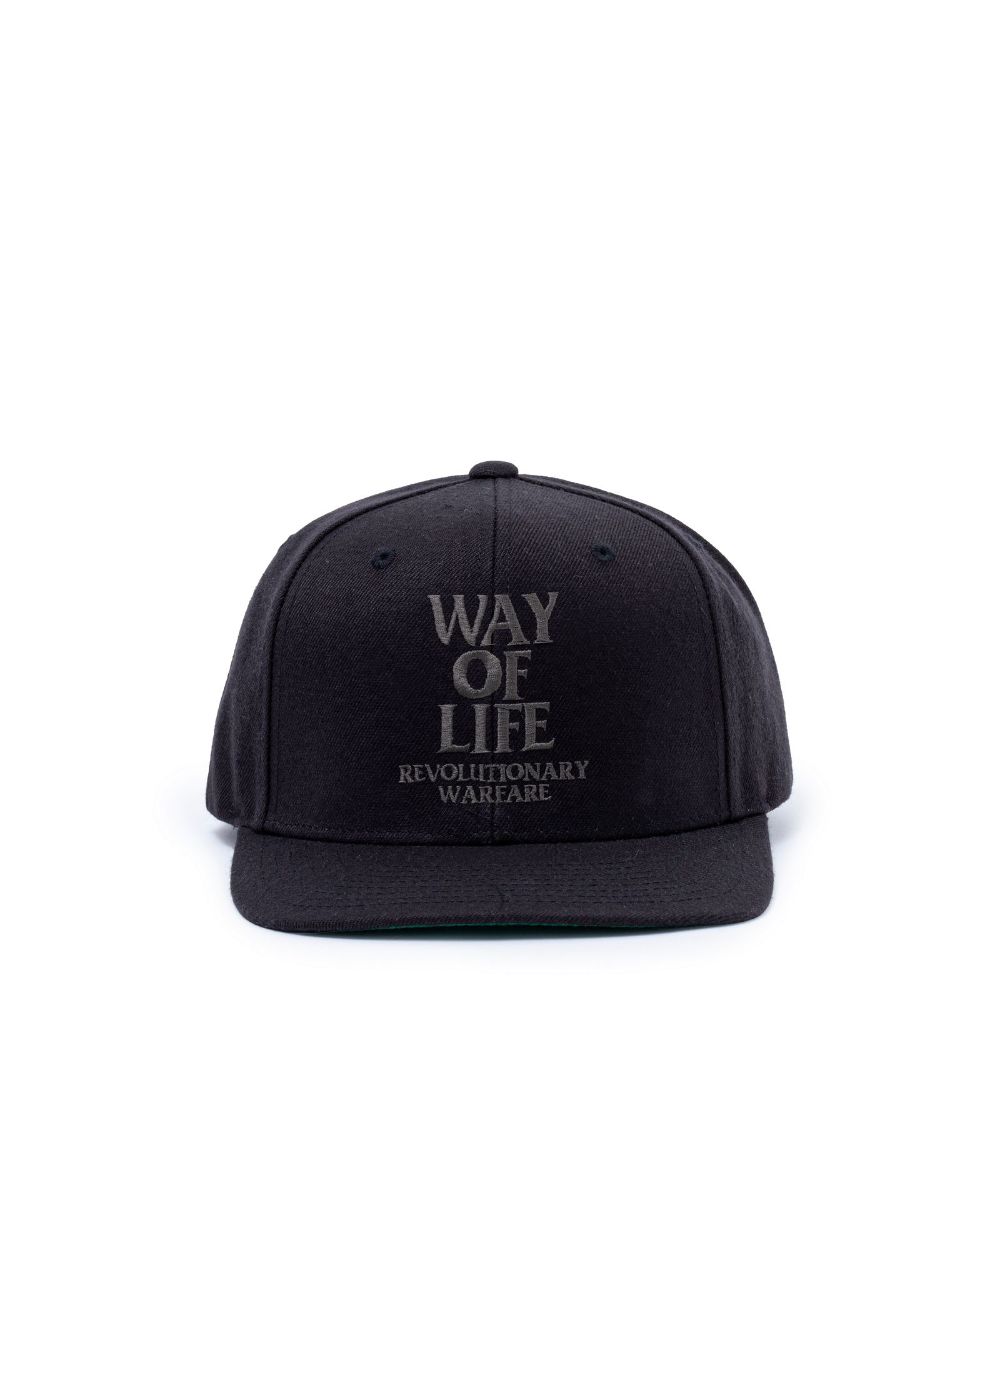 RATS EMBROIDERY WAY OF LIFE CAP キャップ　黒